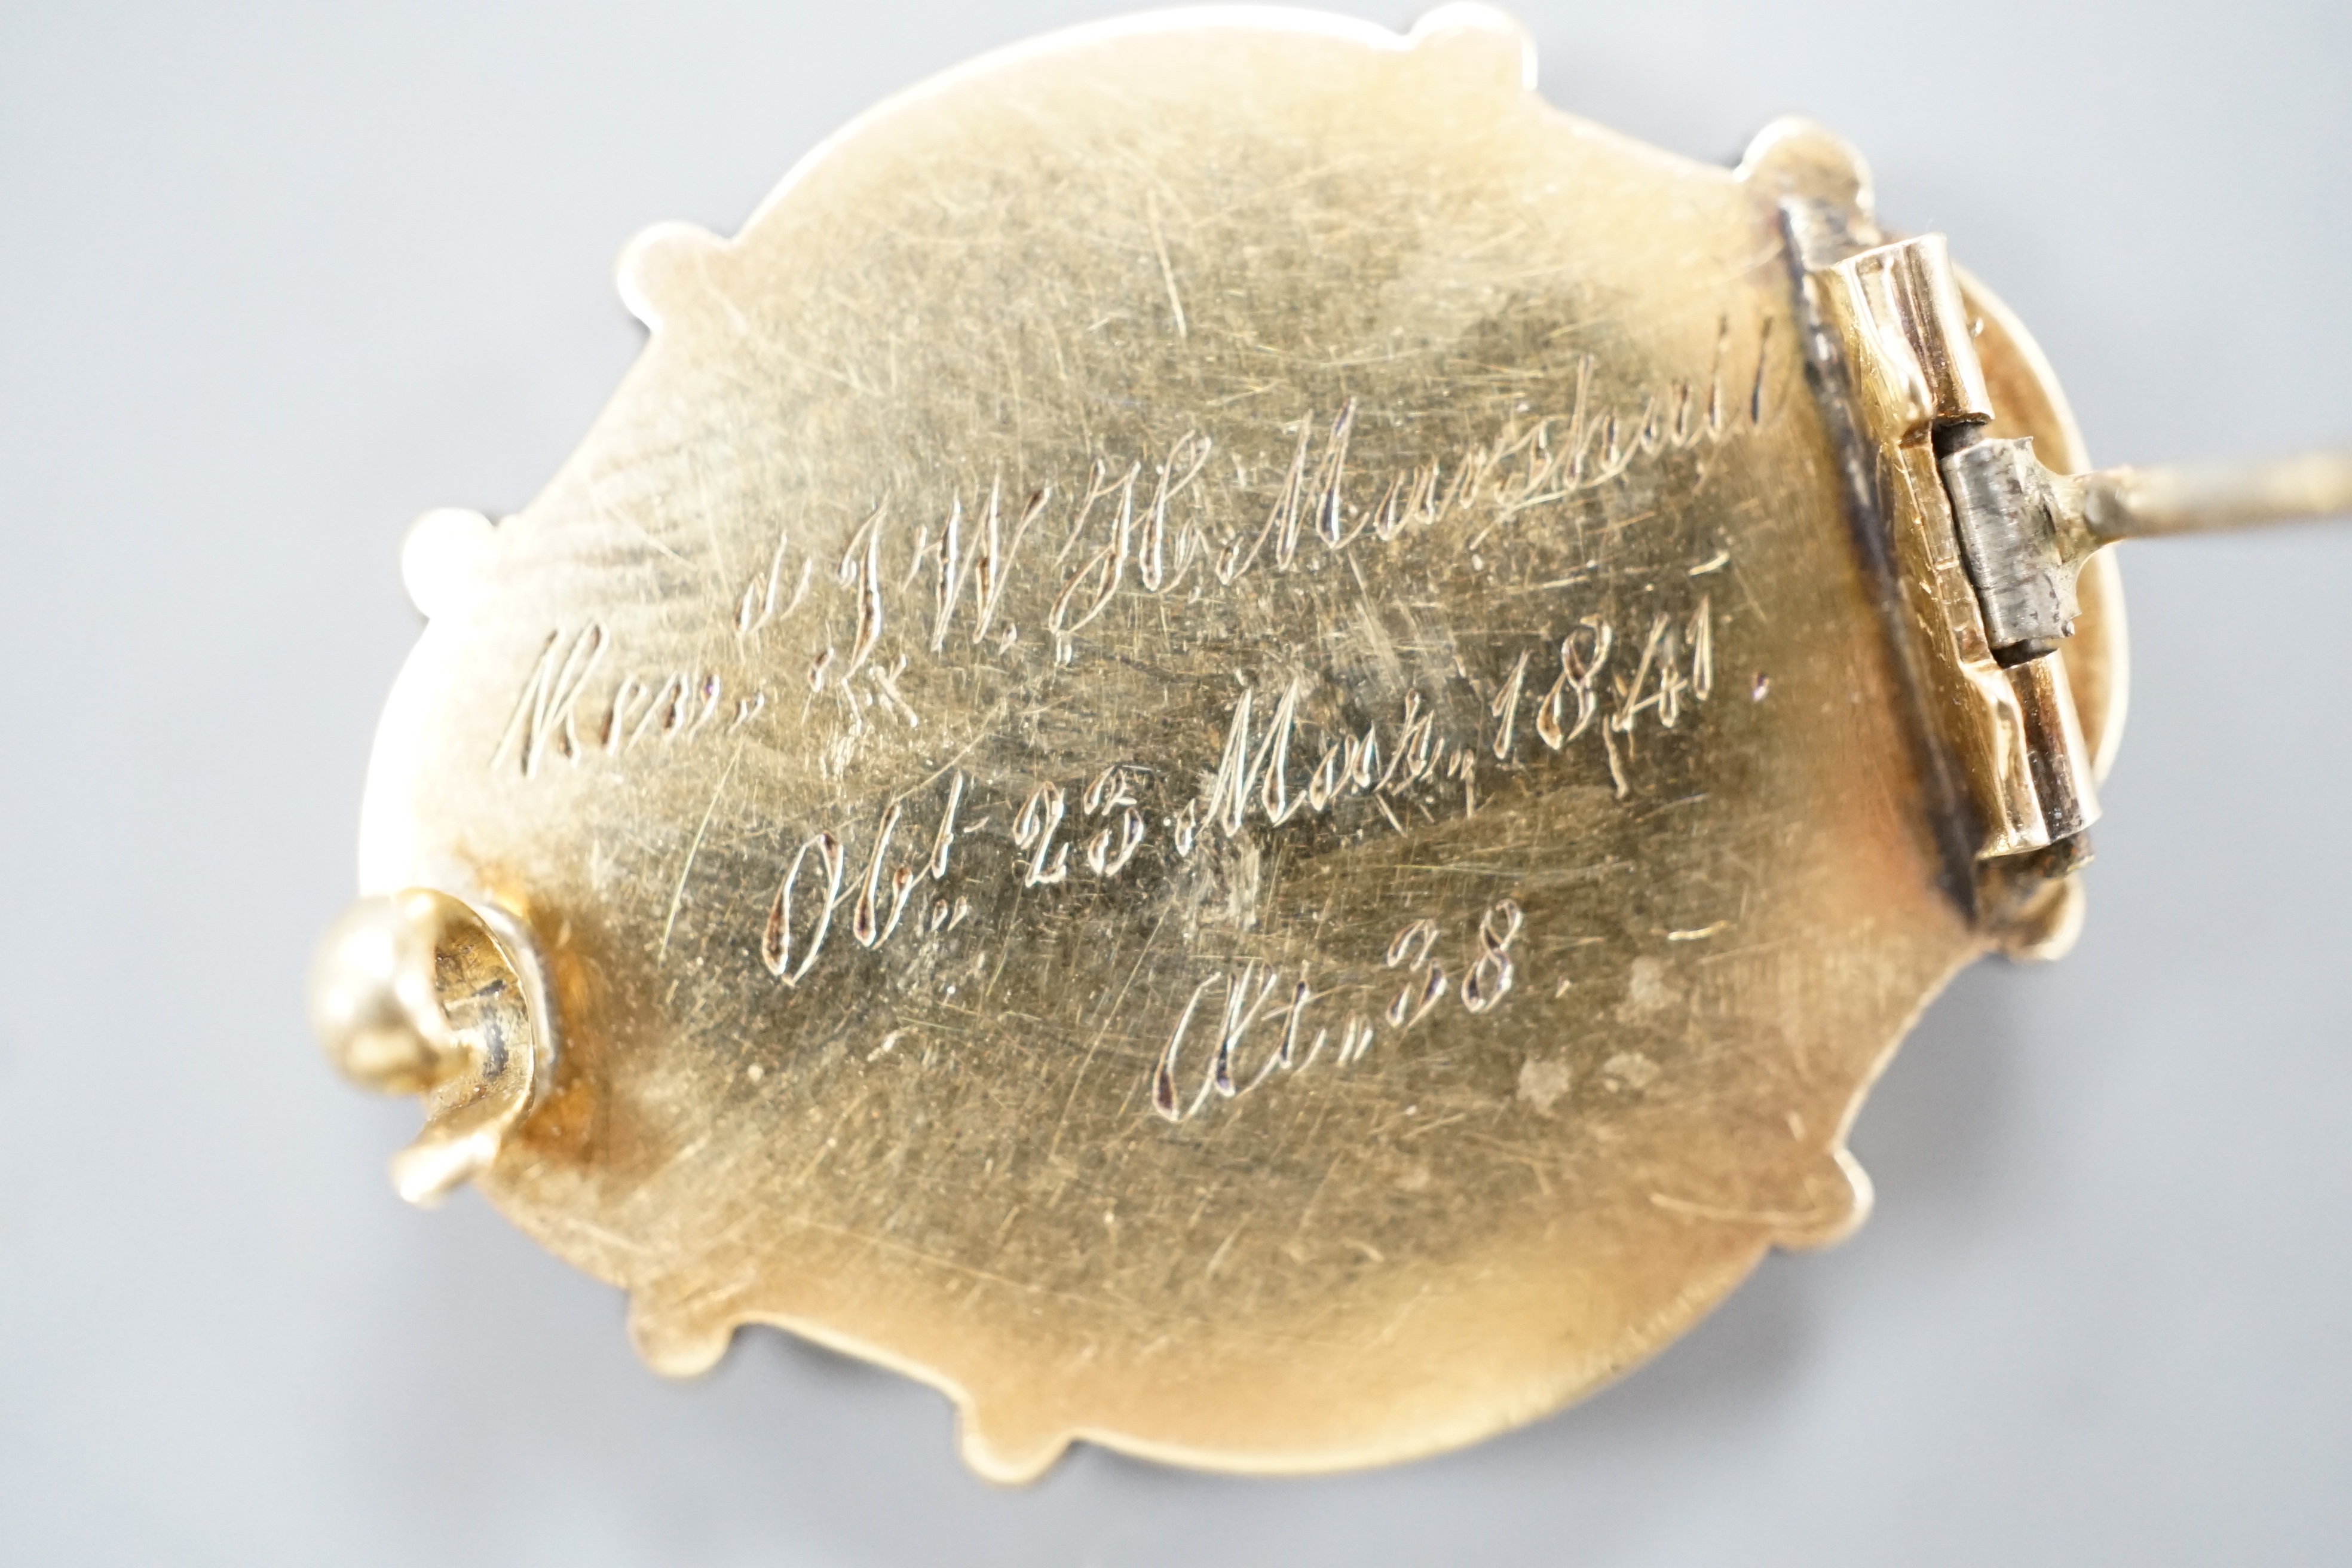 An early Victorian yellow metal, black enamel and plaited hair mourning brooch, inscribed verso, 'Revd. JWH Marshall Obt 23rd March, 1841 at 38', 27mm.